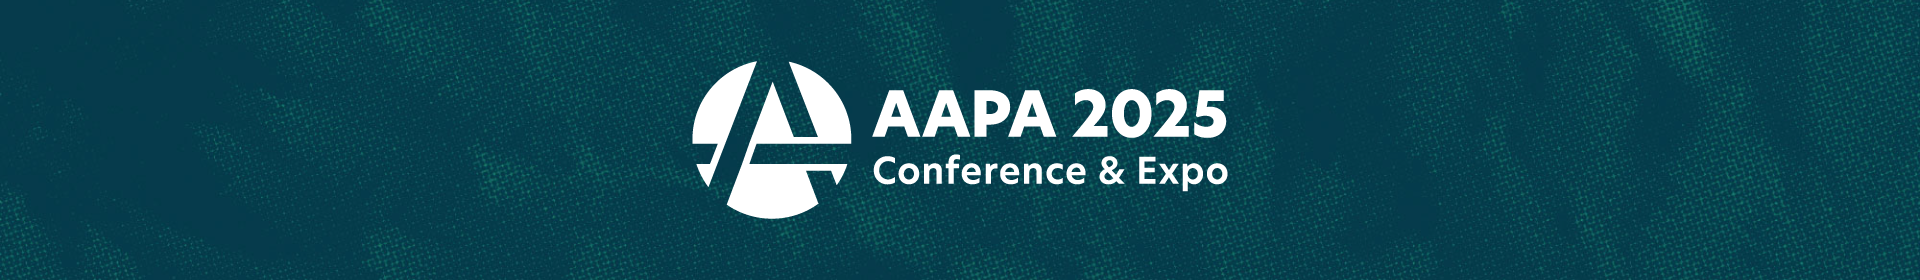 AAPA Conference 2025